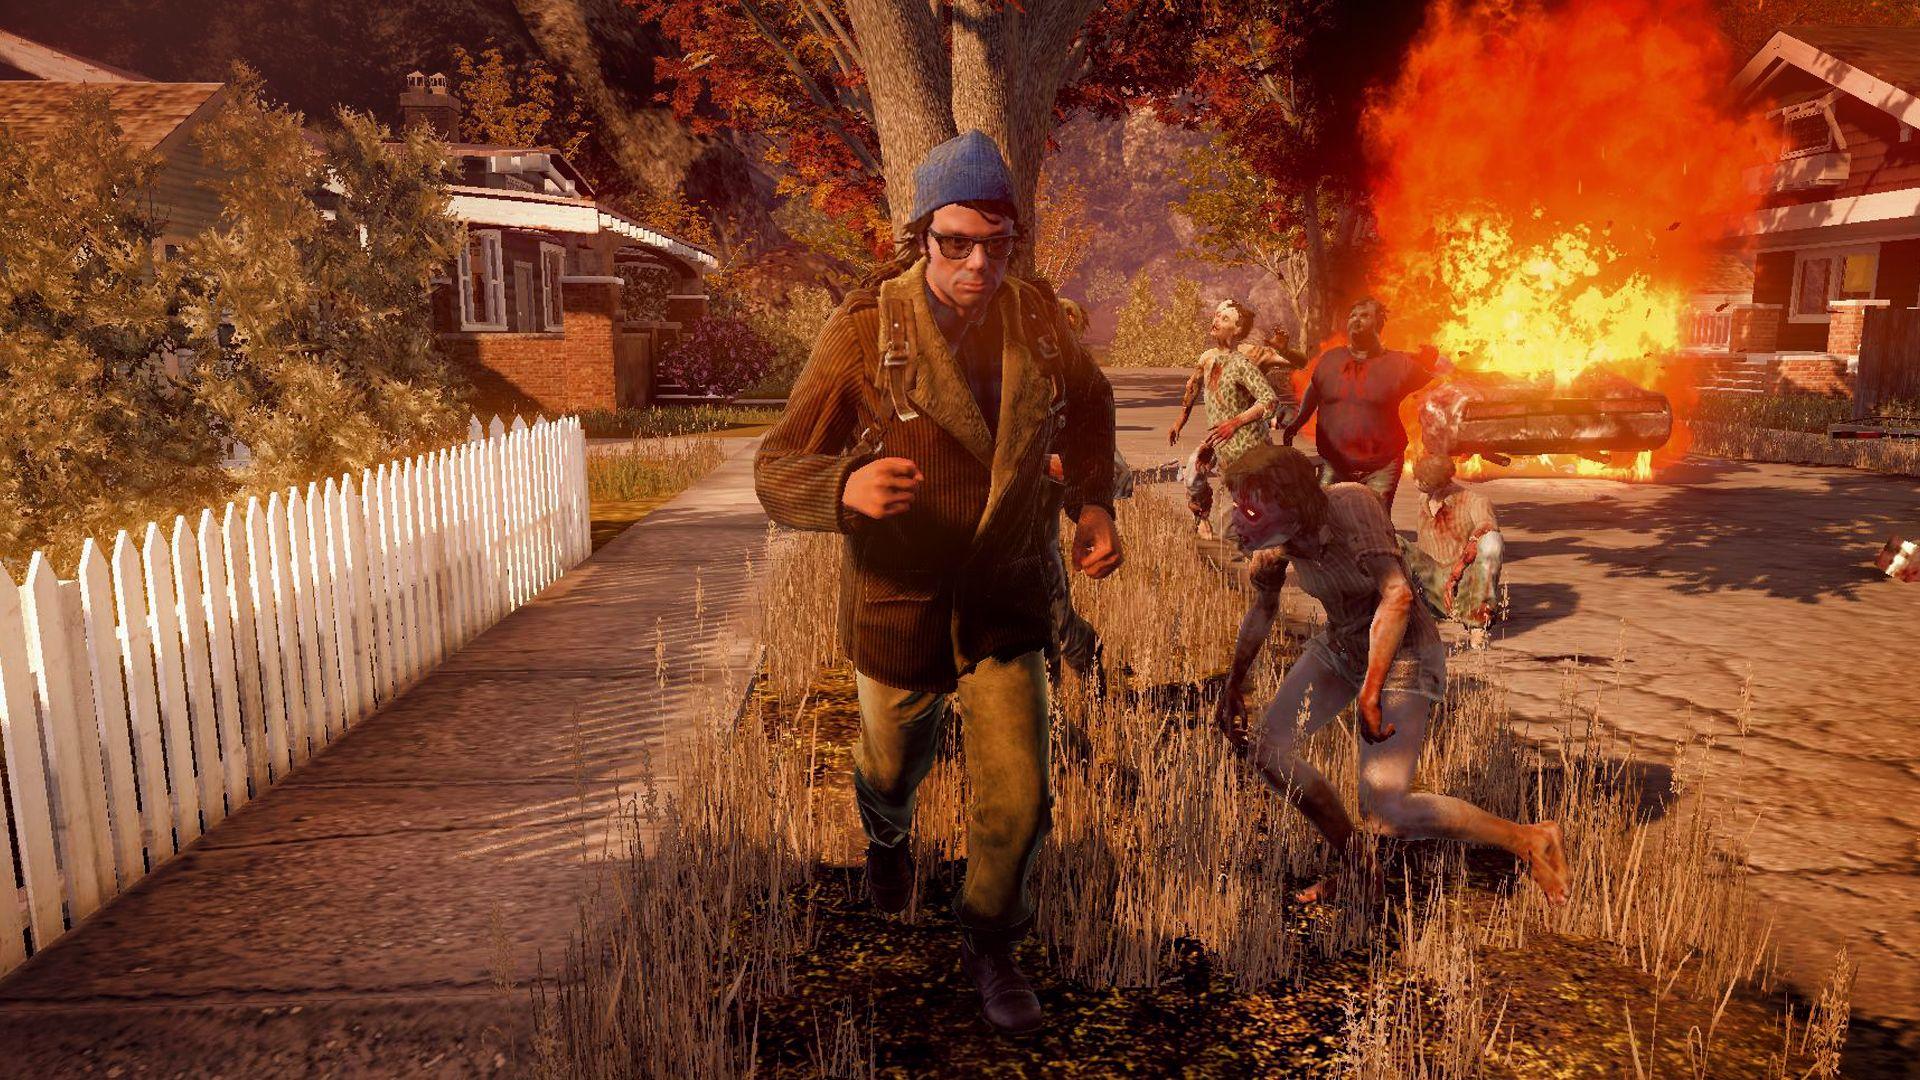 State of Decay 2 Will Be An Online Zombie Game